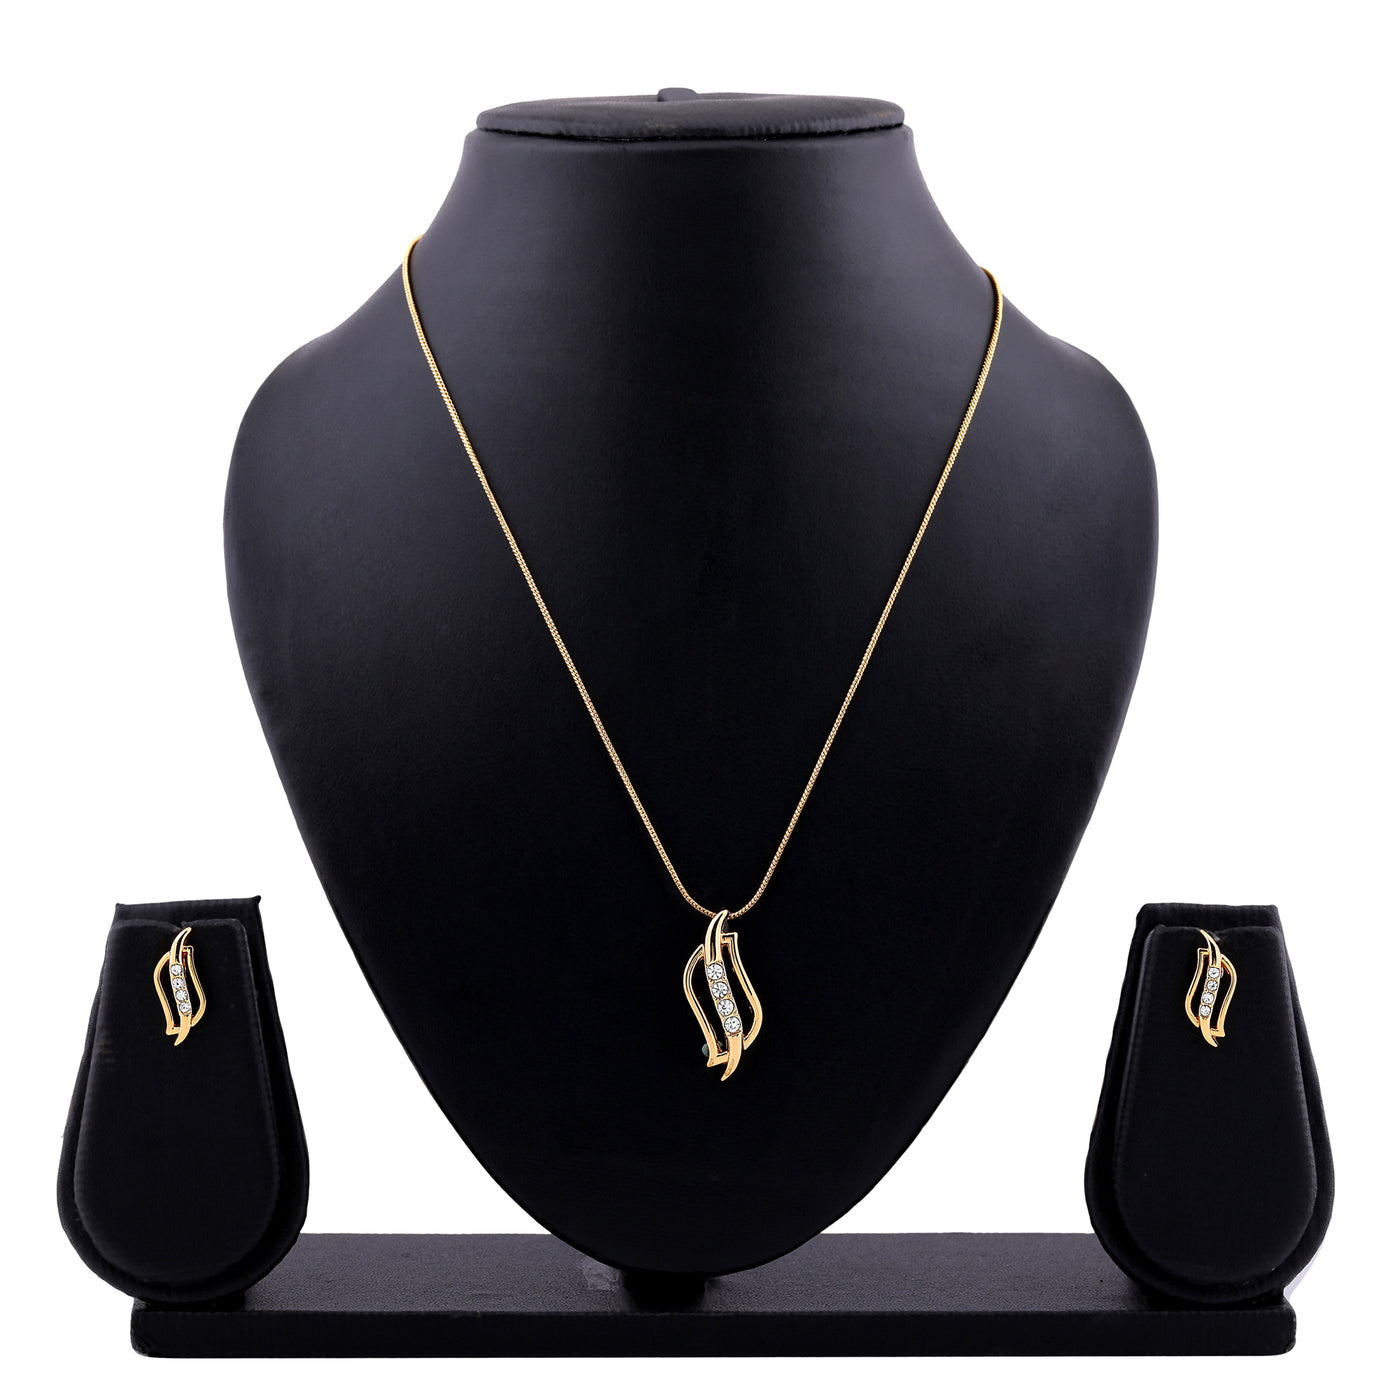 24kt Gold tone plated Pendant Chain With Earrings